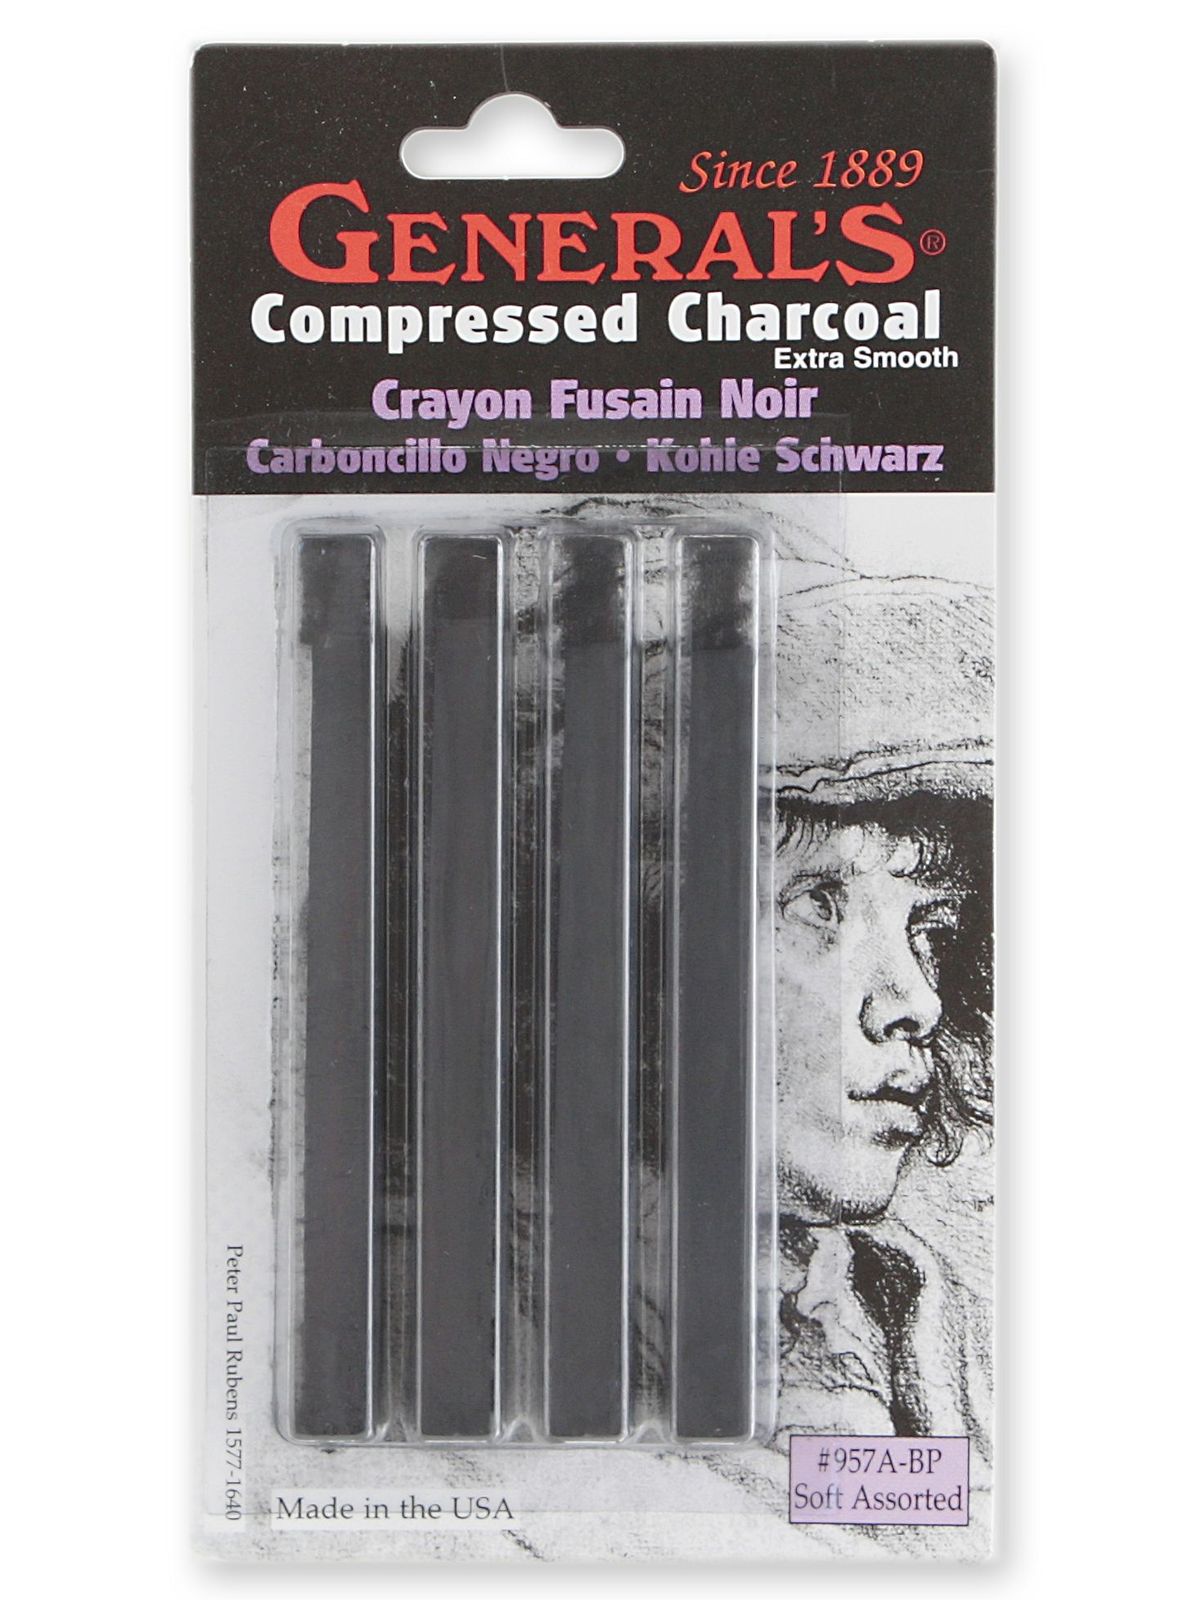 General's Compressed Charcoal